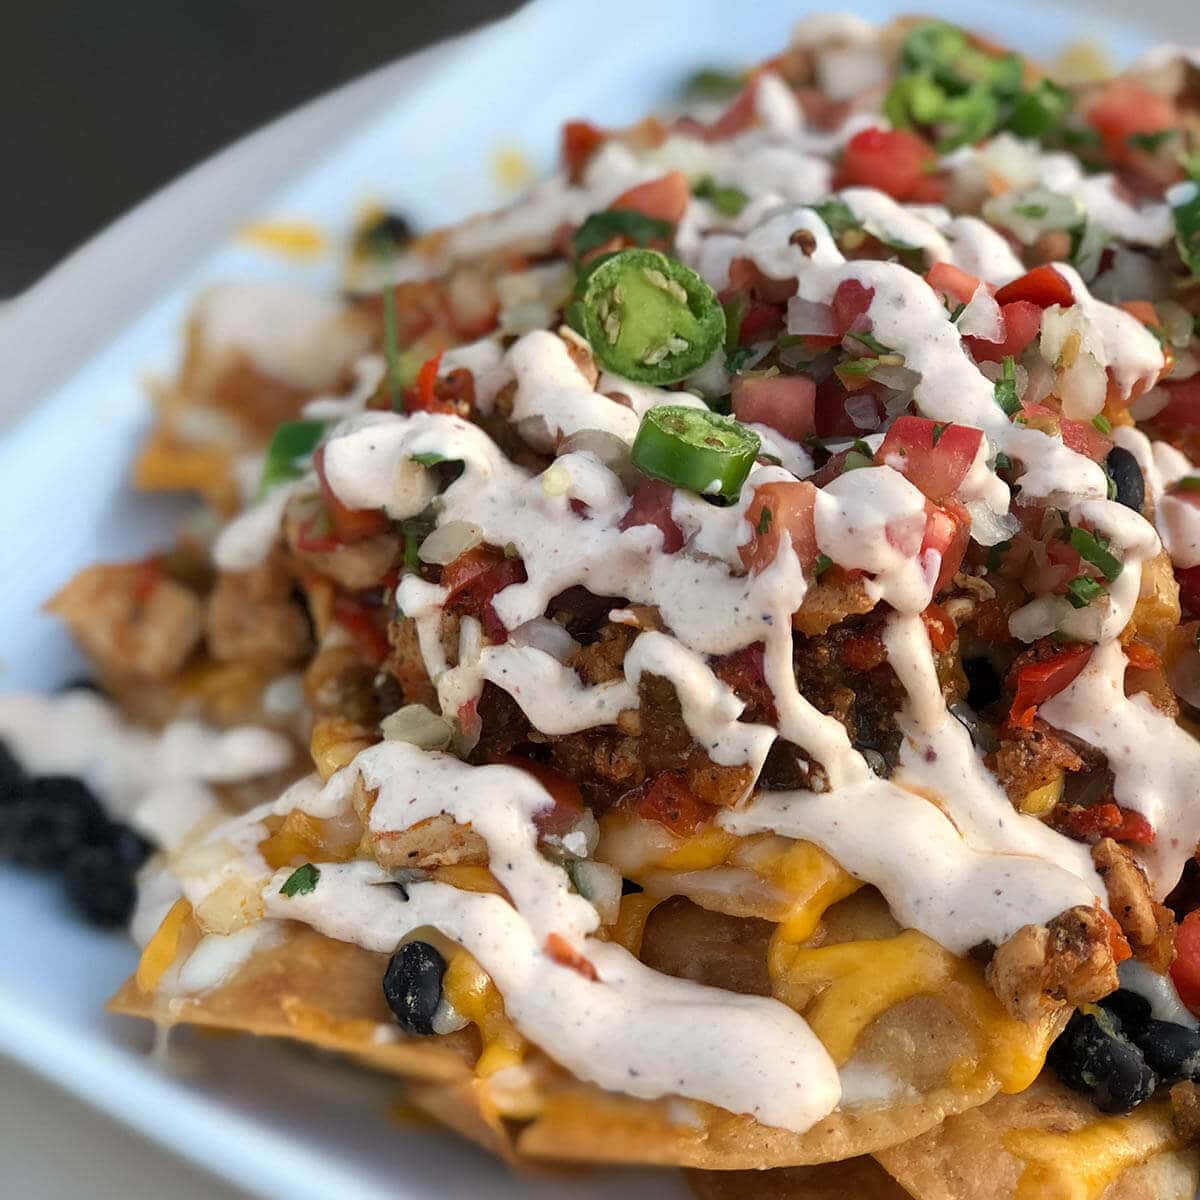 A platter of chili nachos topped with sour cream.